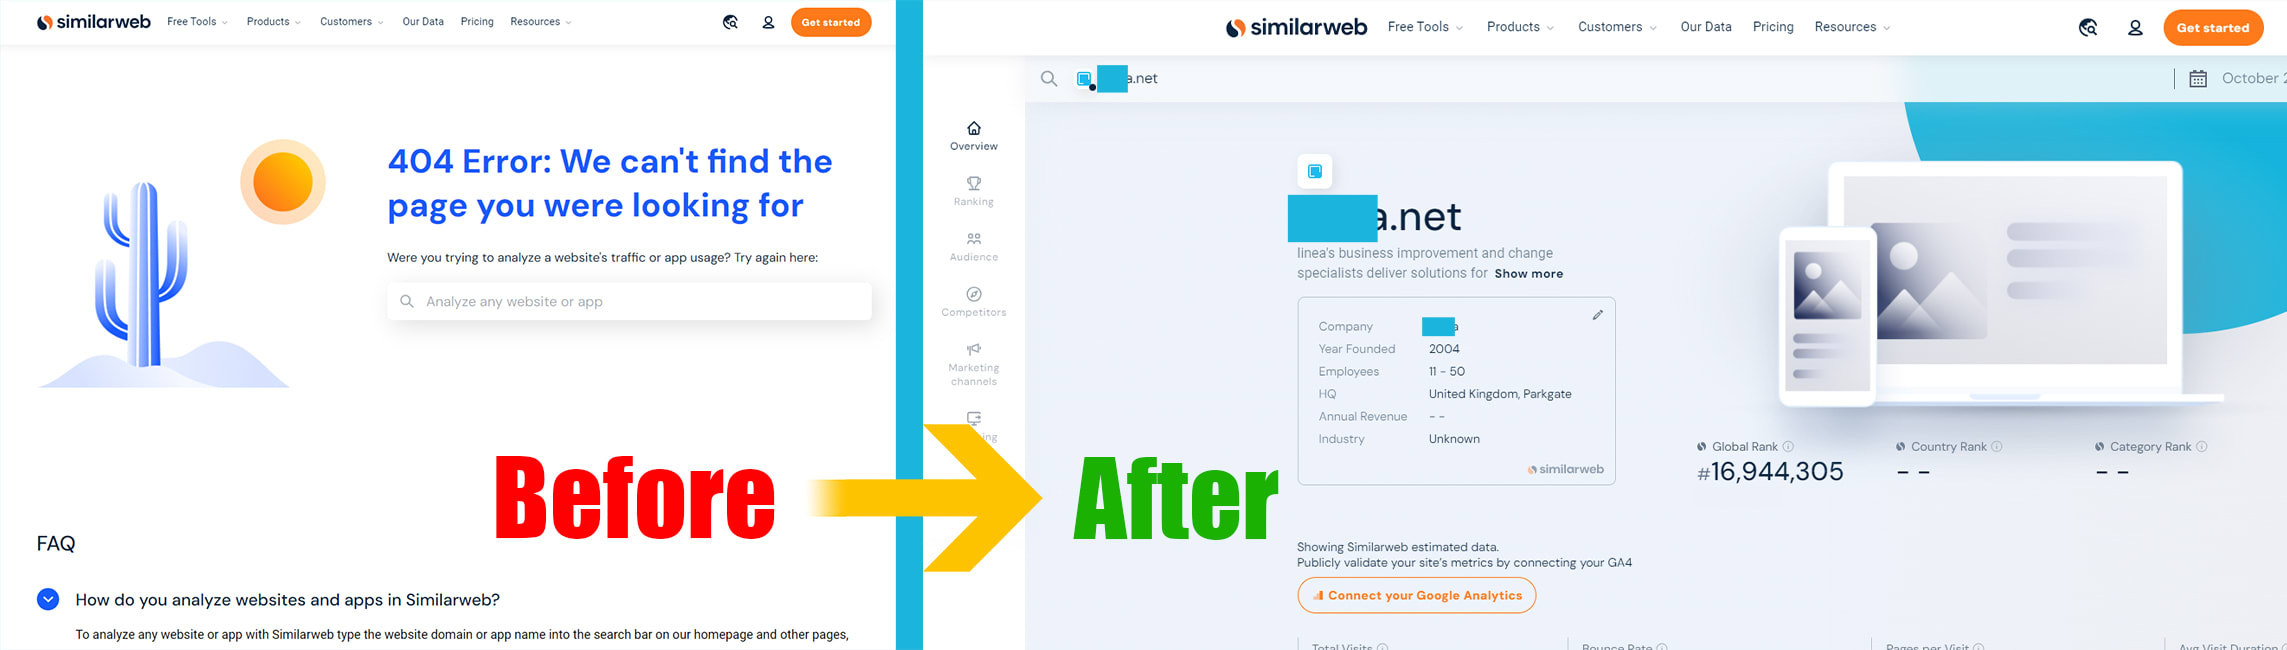 Rank Your New WebSite on Similarweb - Only for a $5 unlock the presence of your new website on Similarweb. Boost your Similarweb rankings, increase visibility, and gain credibility in your industry with our proven cheap and real traffic service